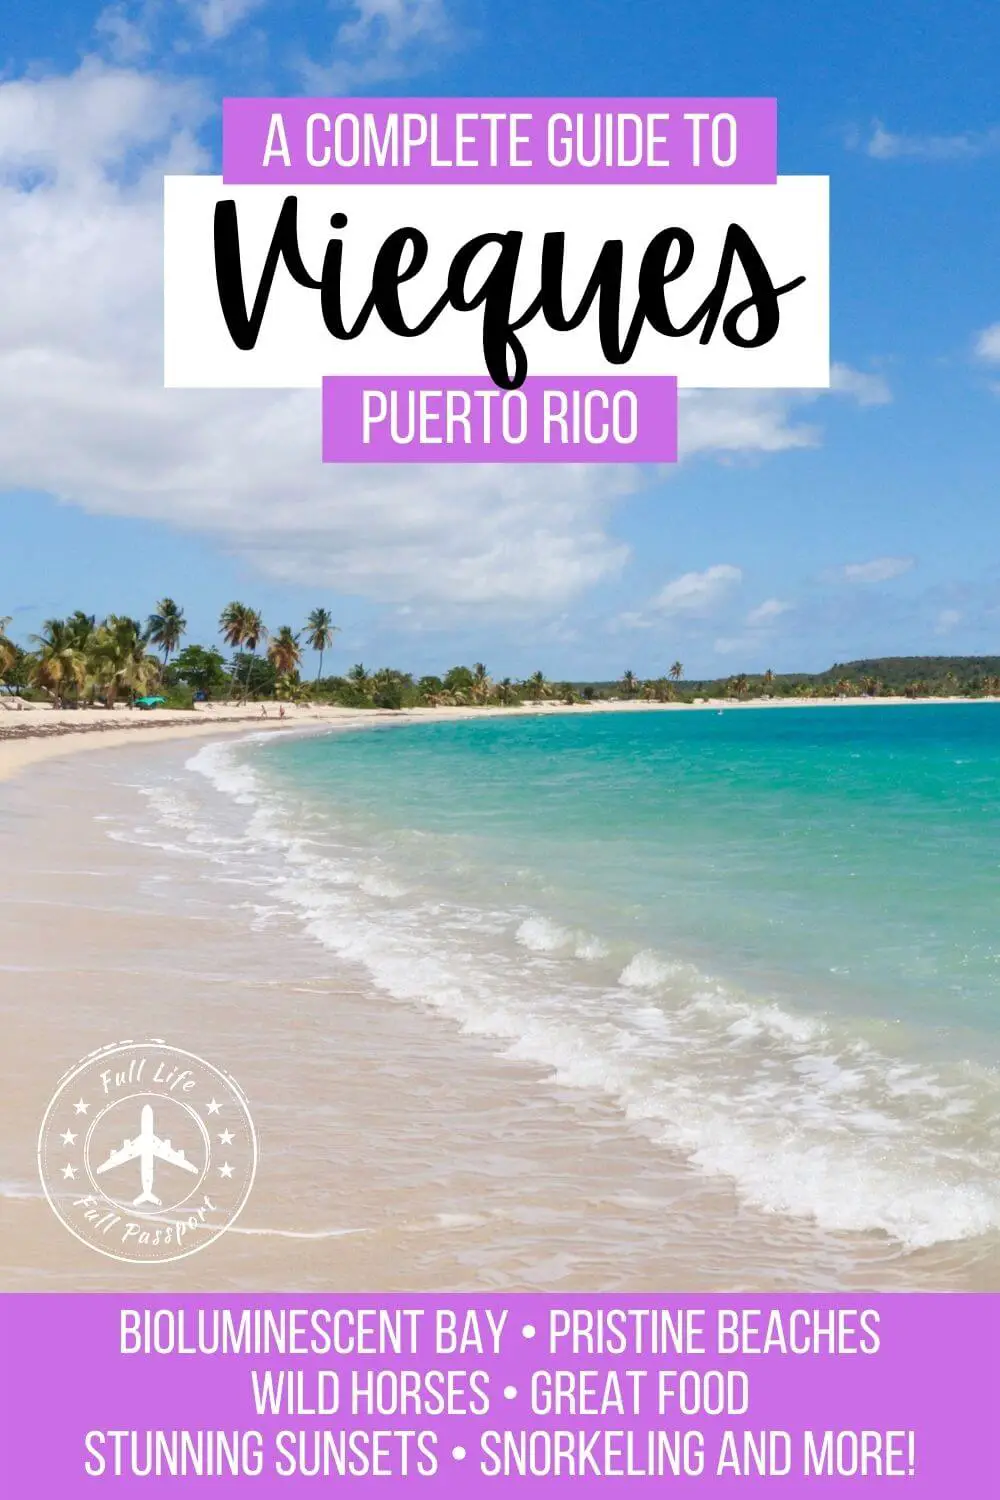 A Complete Guide to Vieques, Puerto Rico